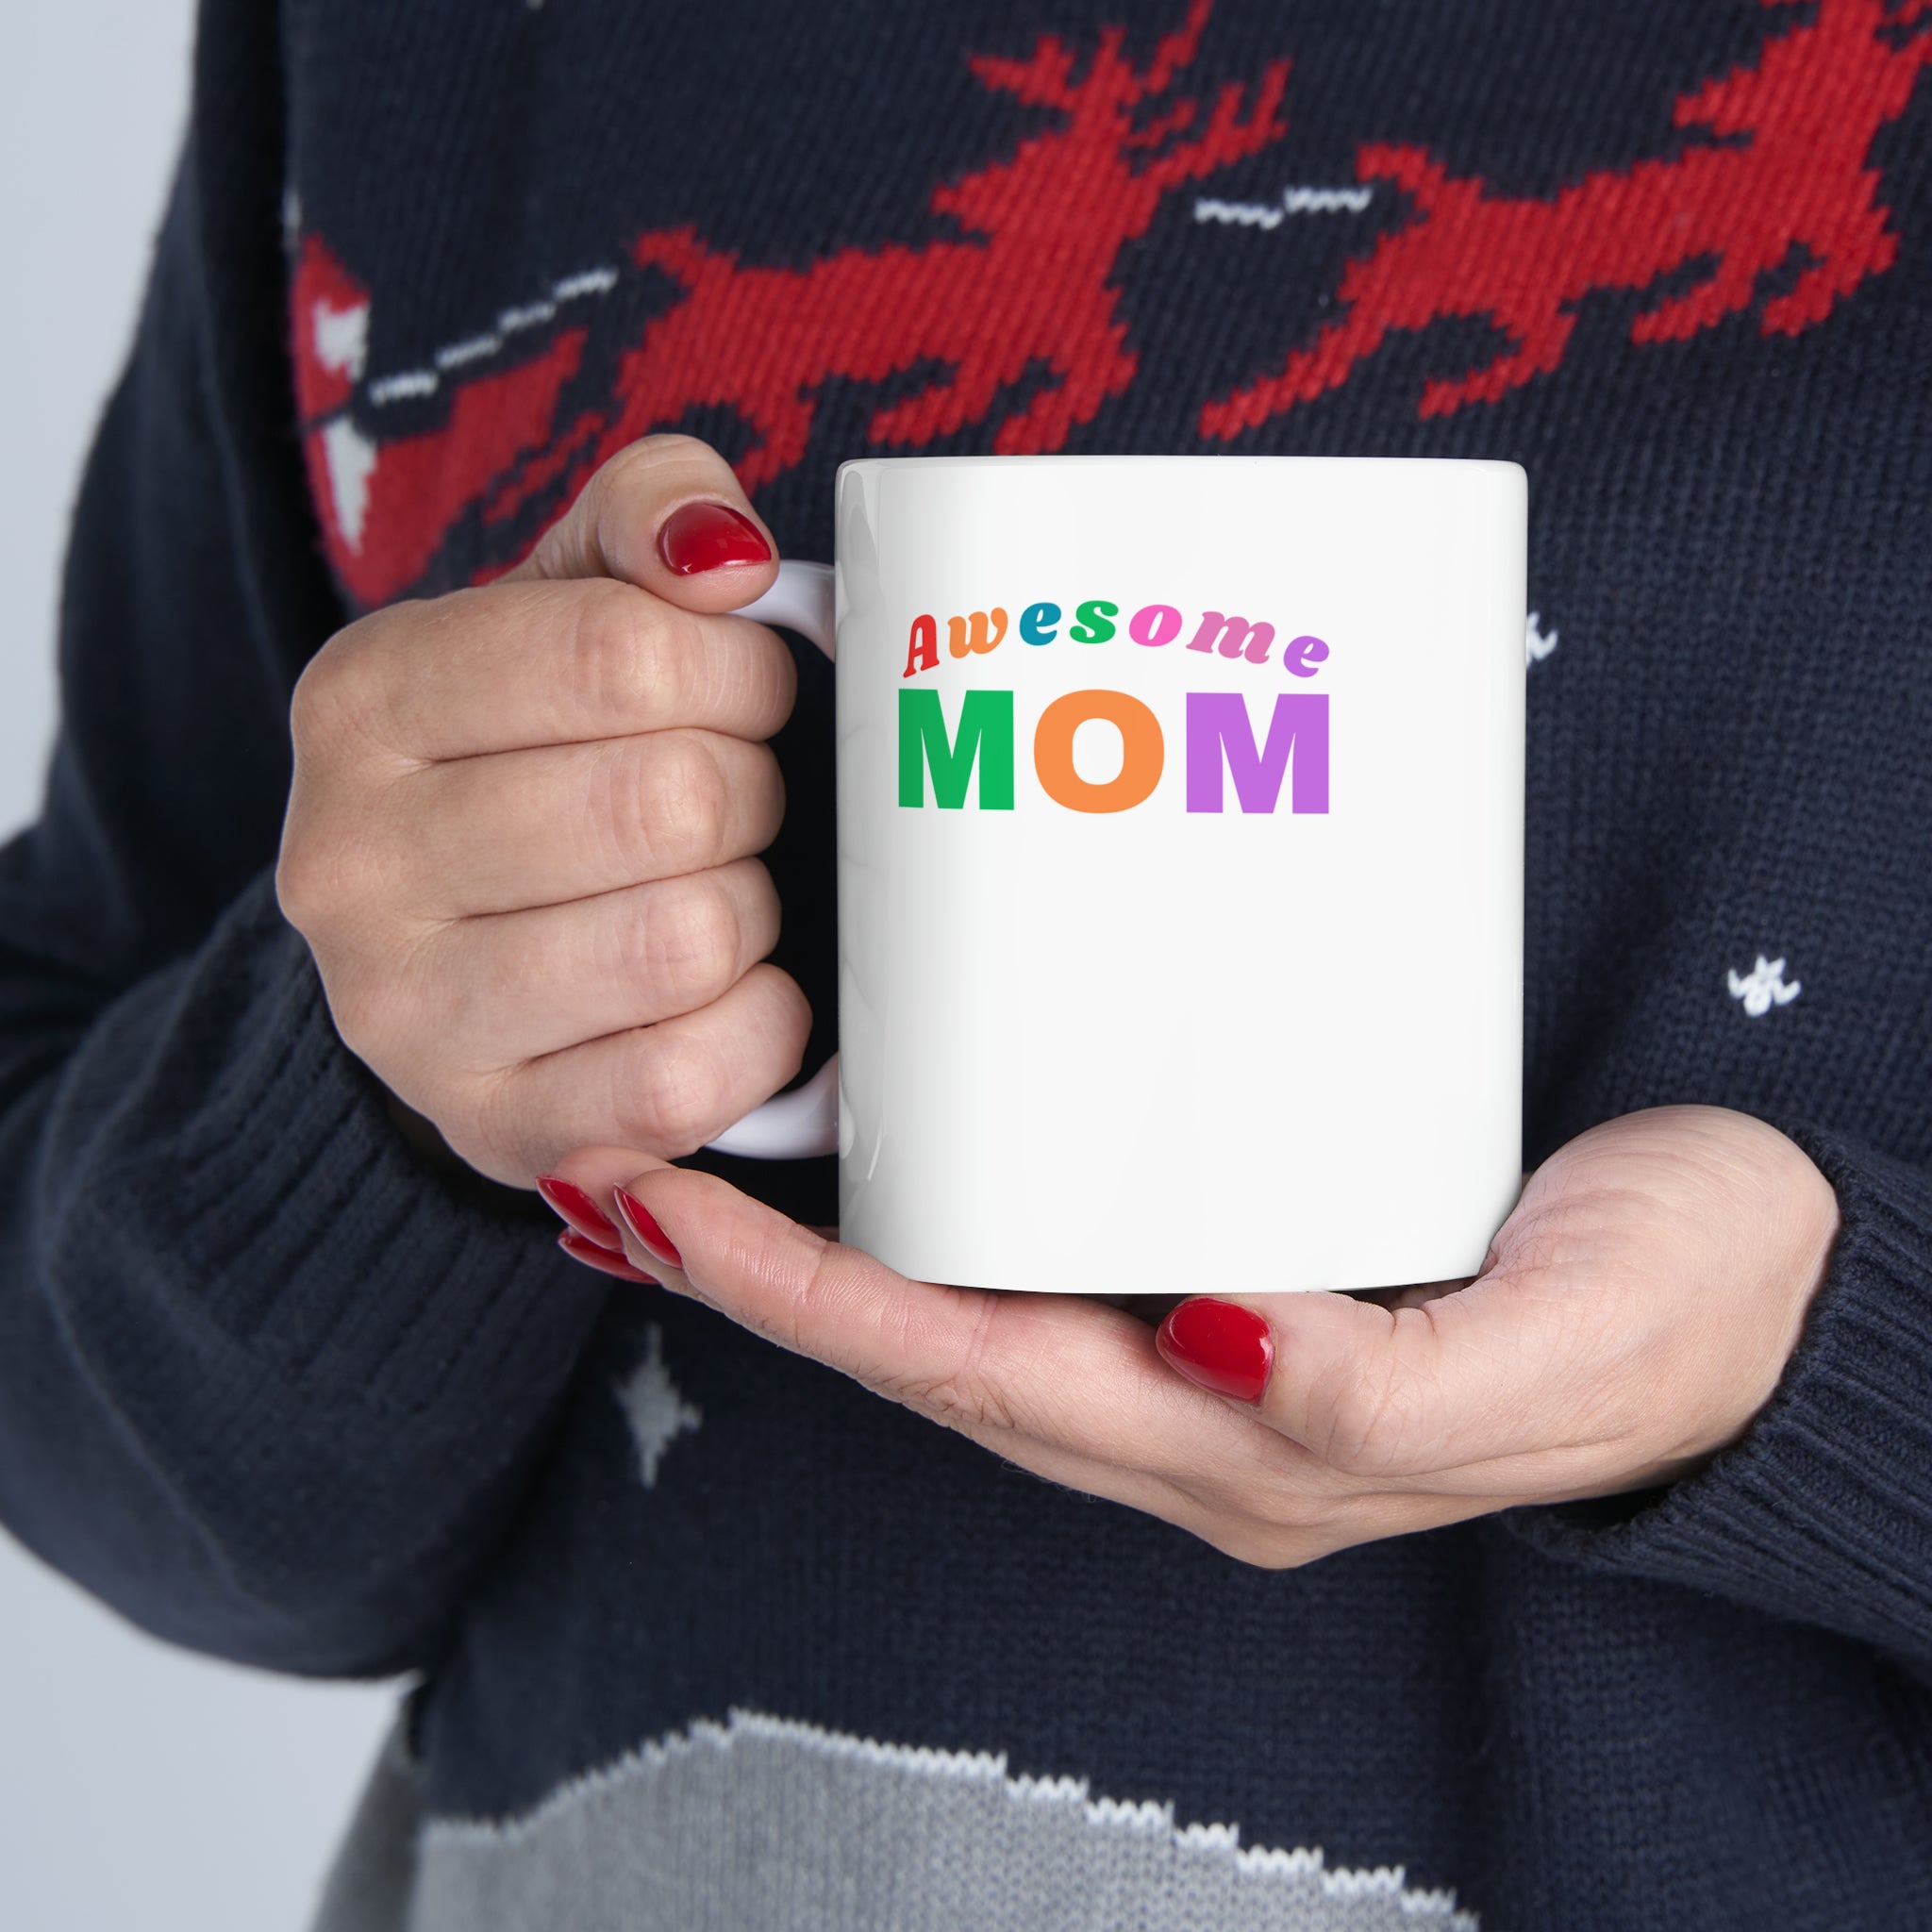 Mother's Day Coffee Mug, Awesome Mom Ceramic Mug, 11oz, Mother's Day Gift,  Mother's Day Gift Mug, Happy Mother's Day